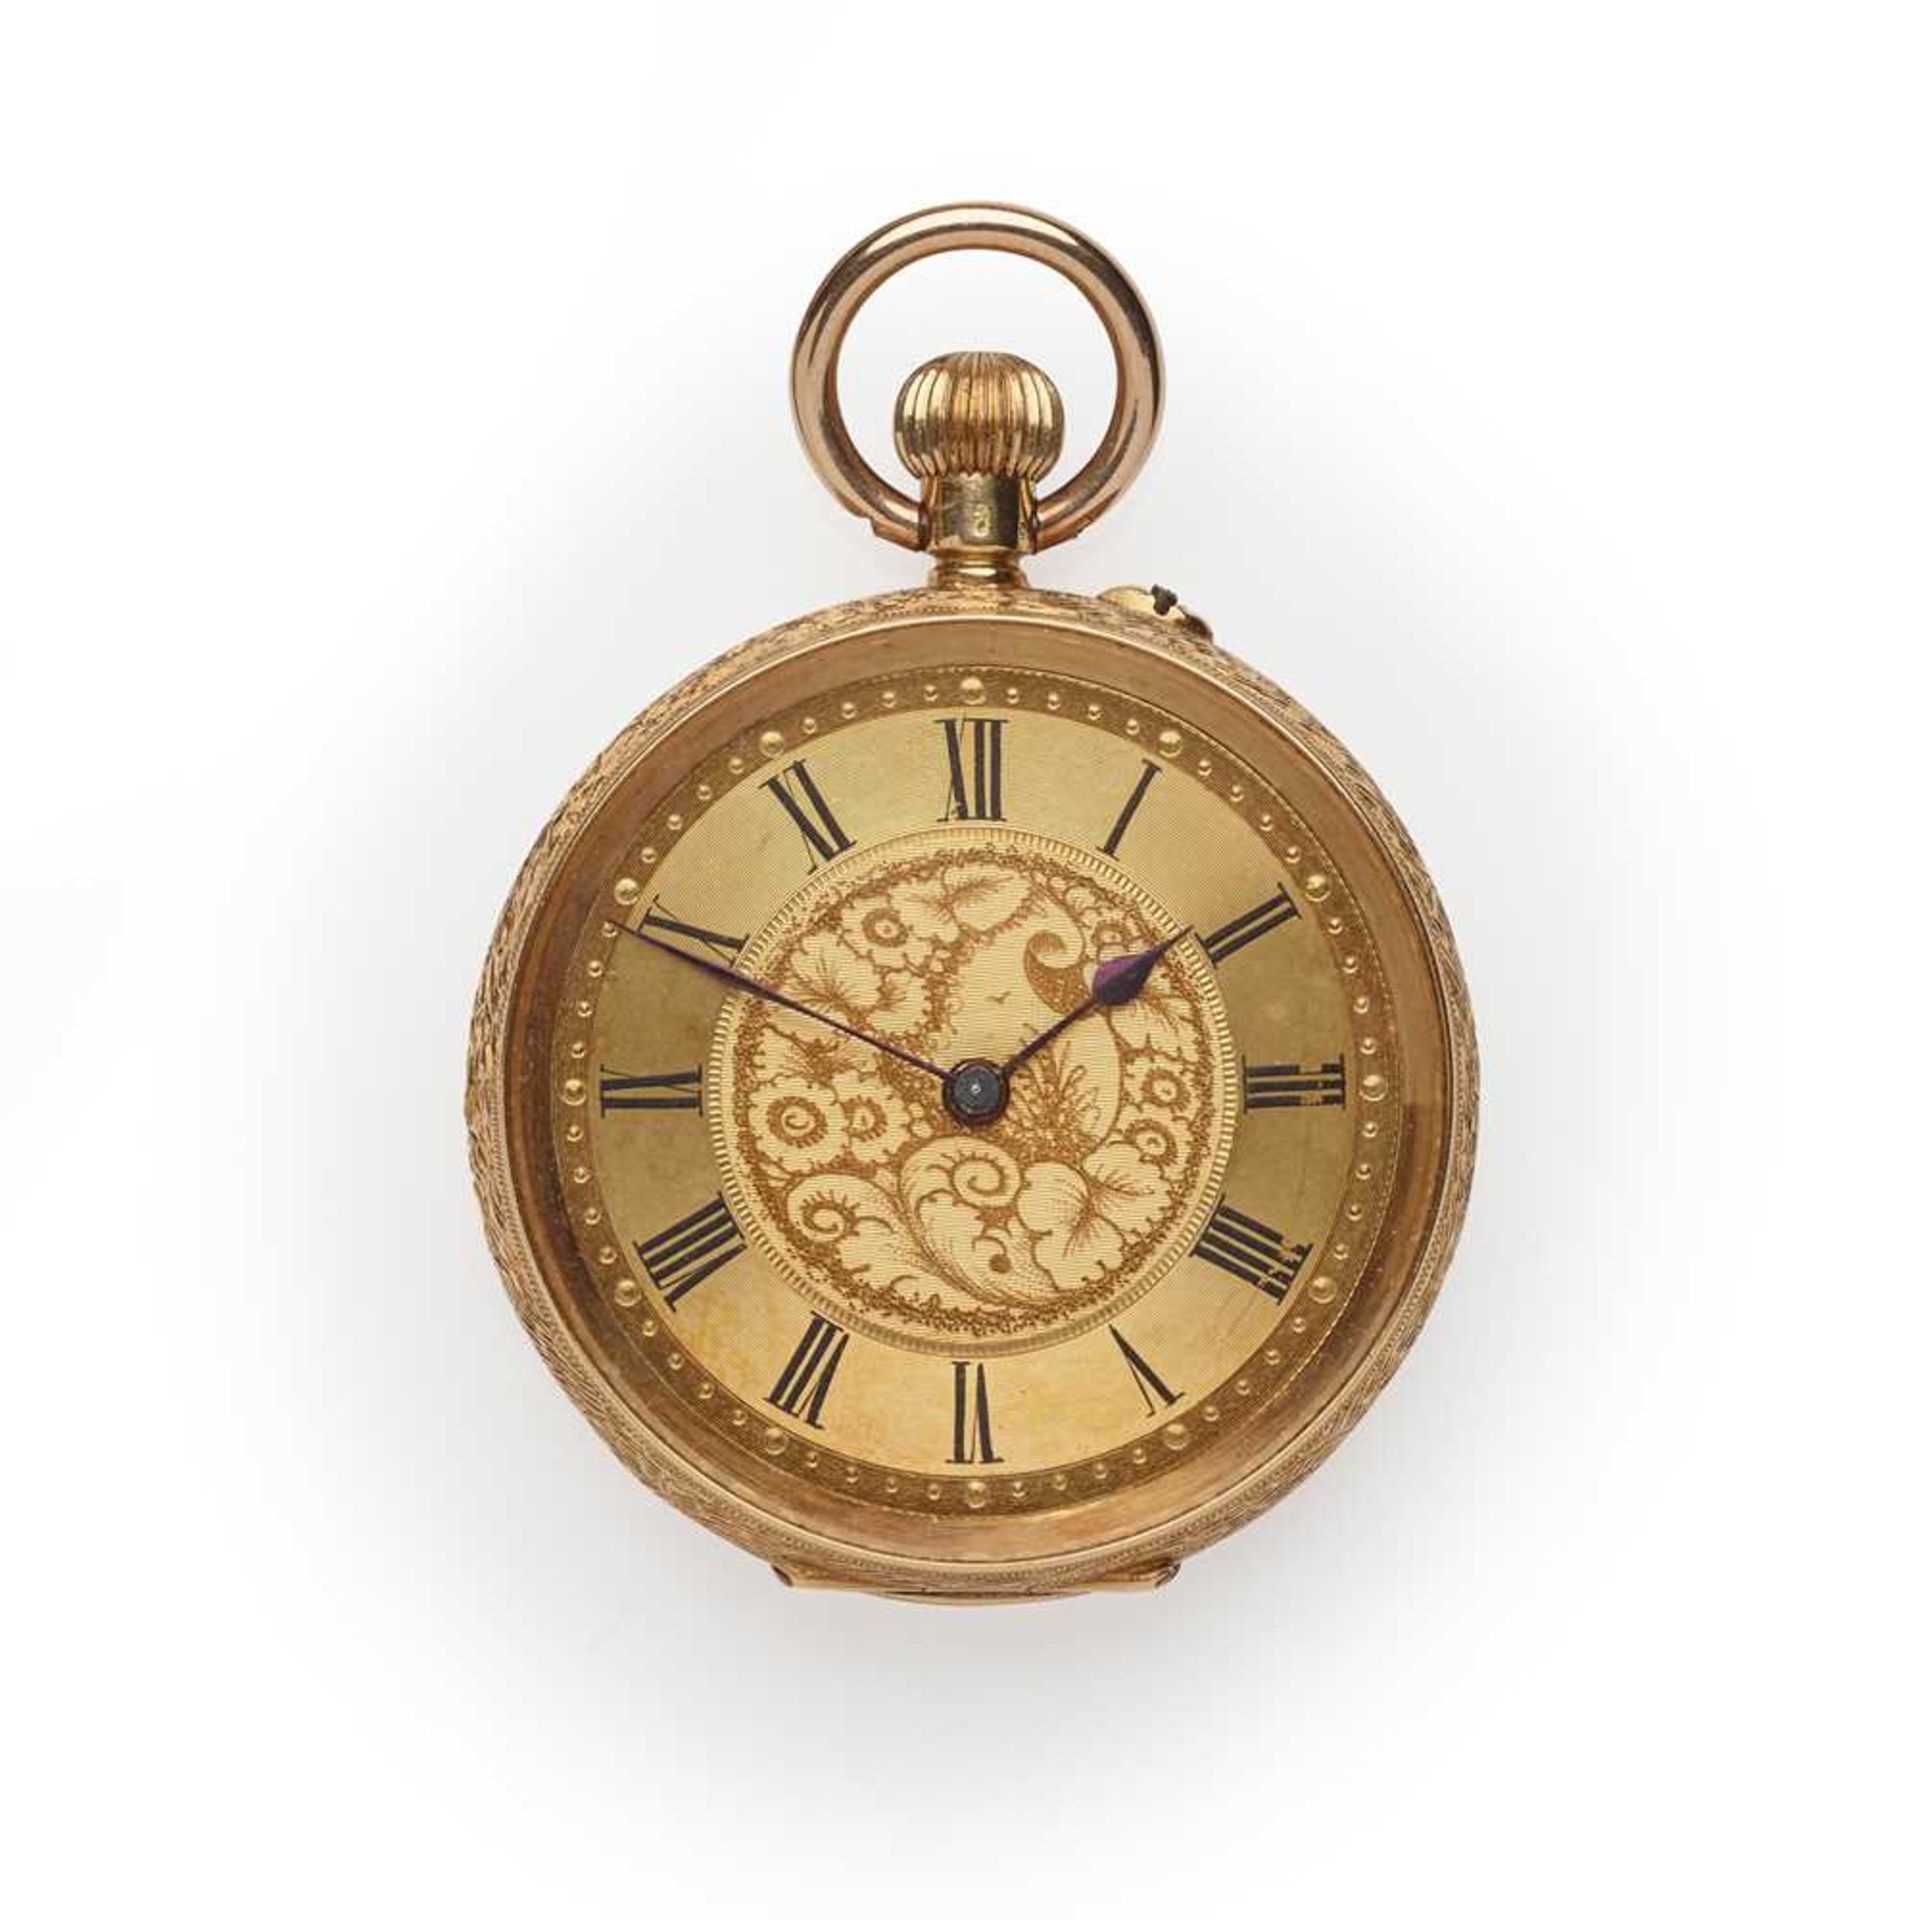 A 19th century fob watch and chain - Image 2 of 2